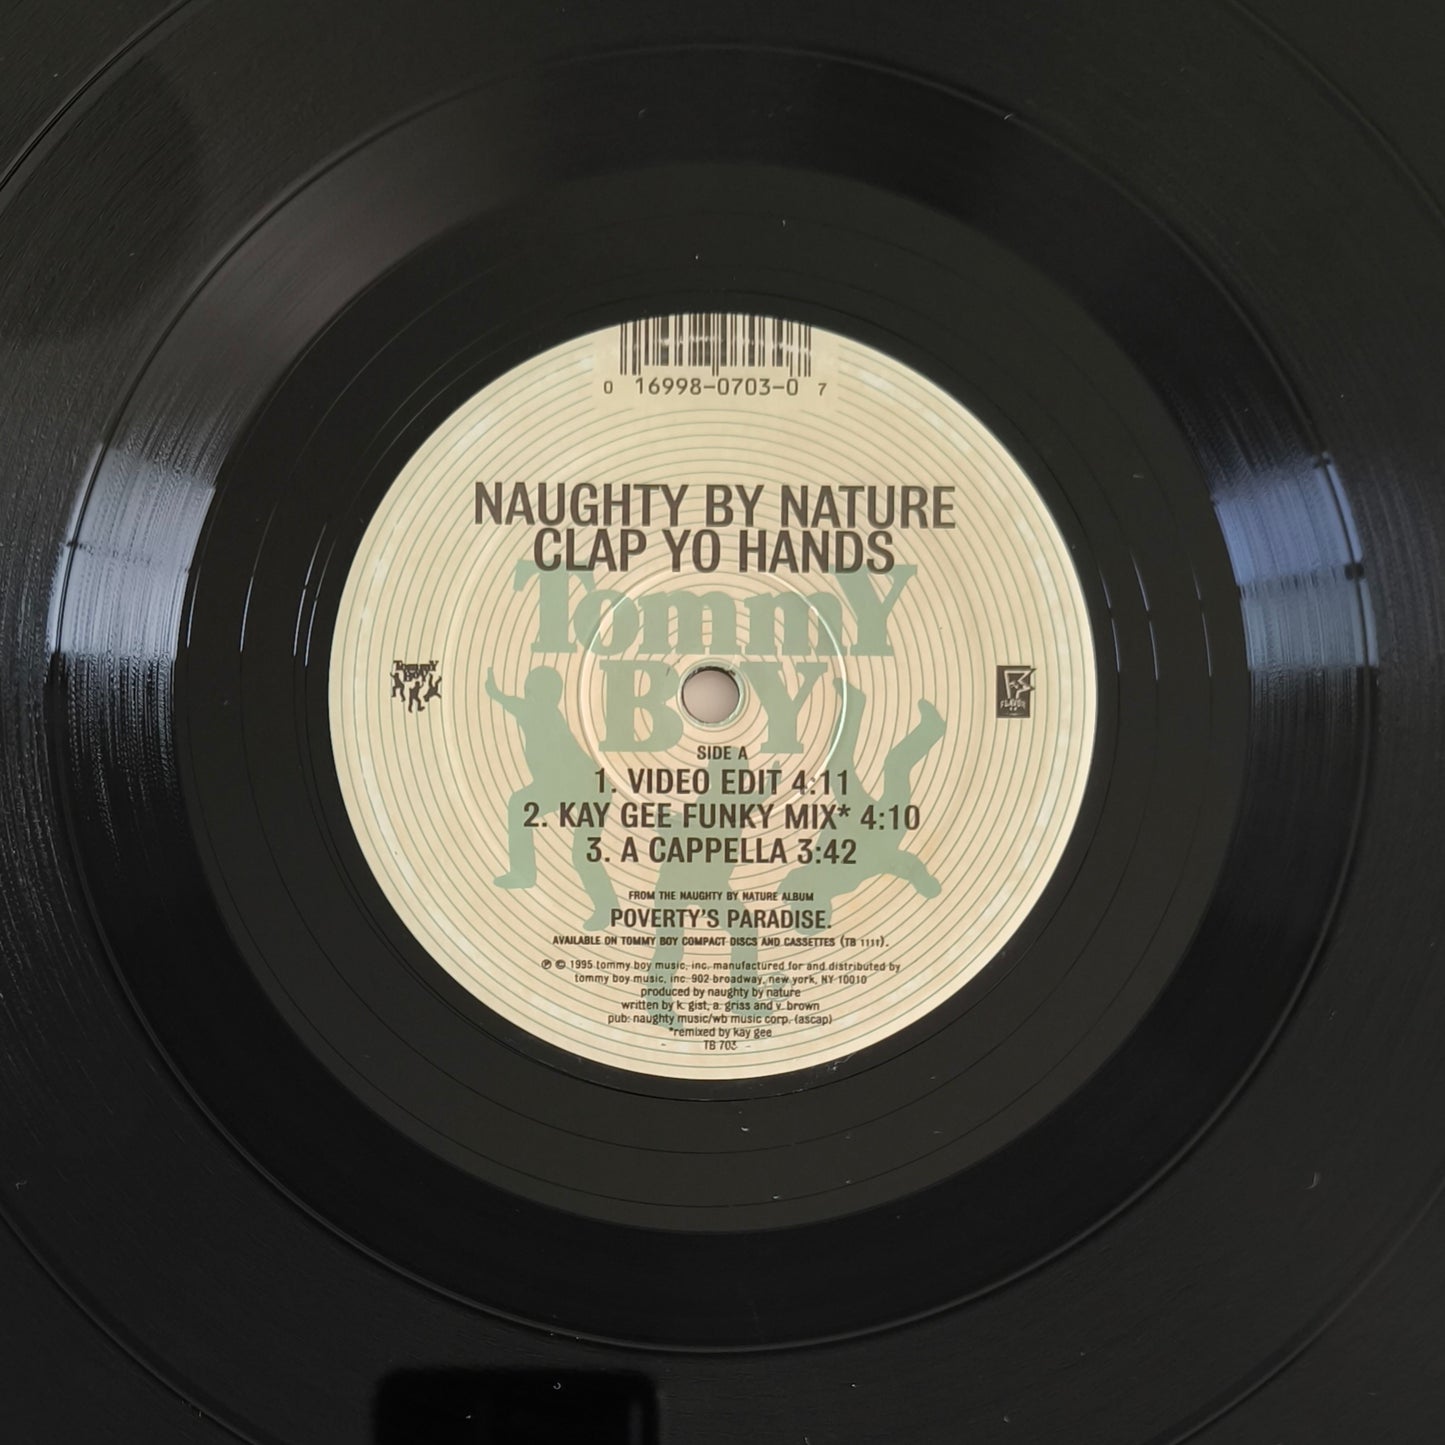 NAUGHTY BY NATURE - Clap Yo Hands / The Chain Remains